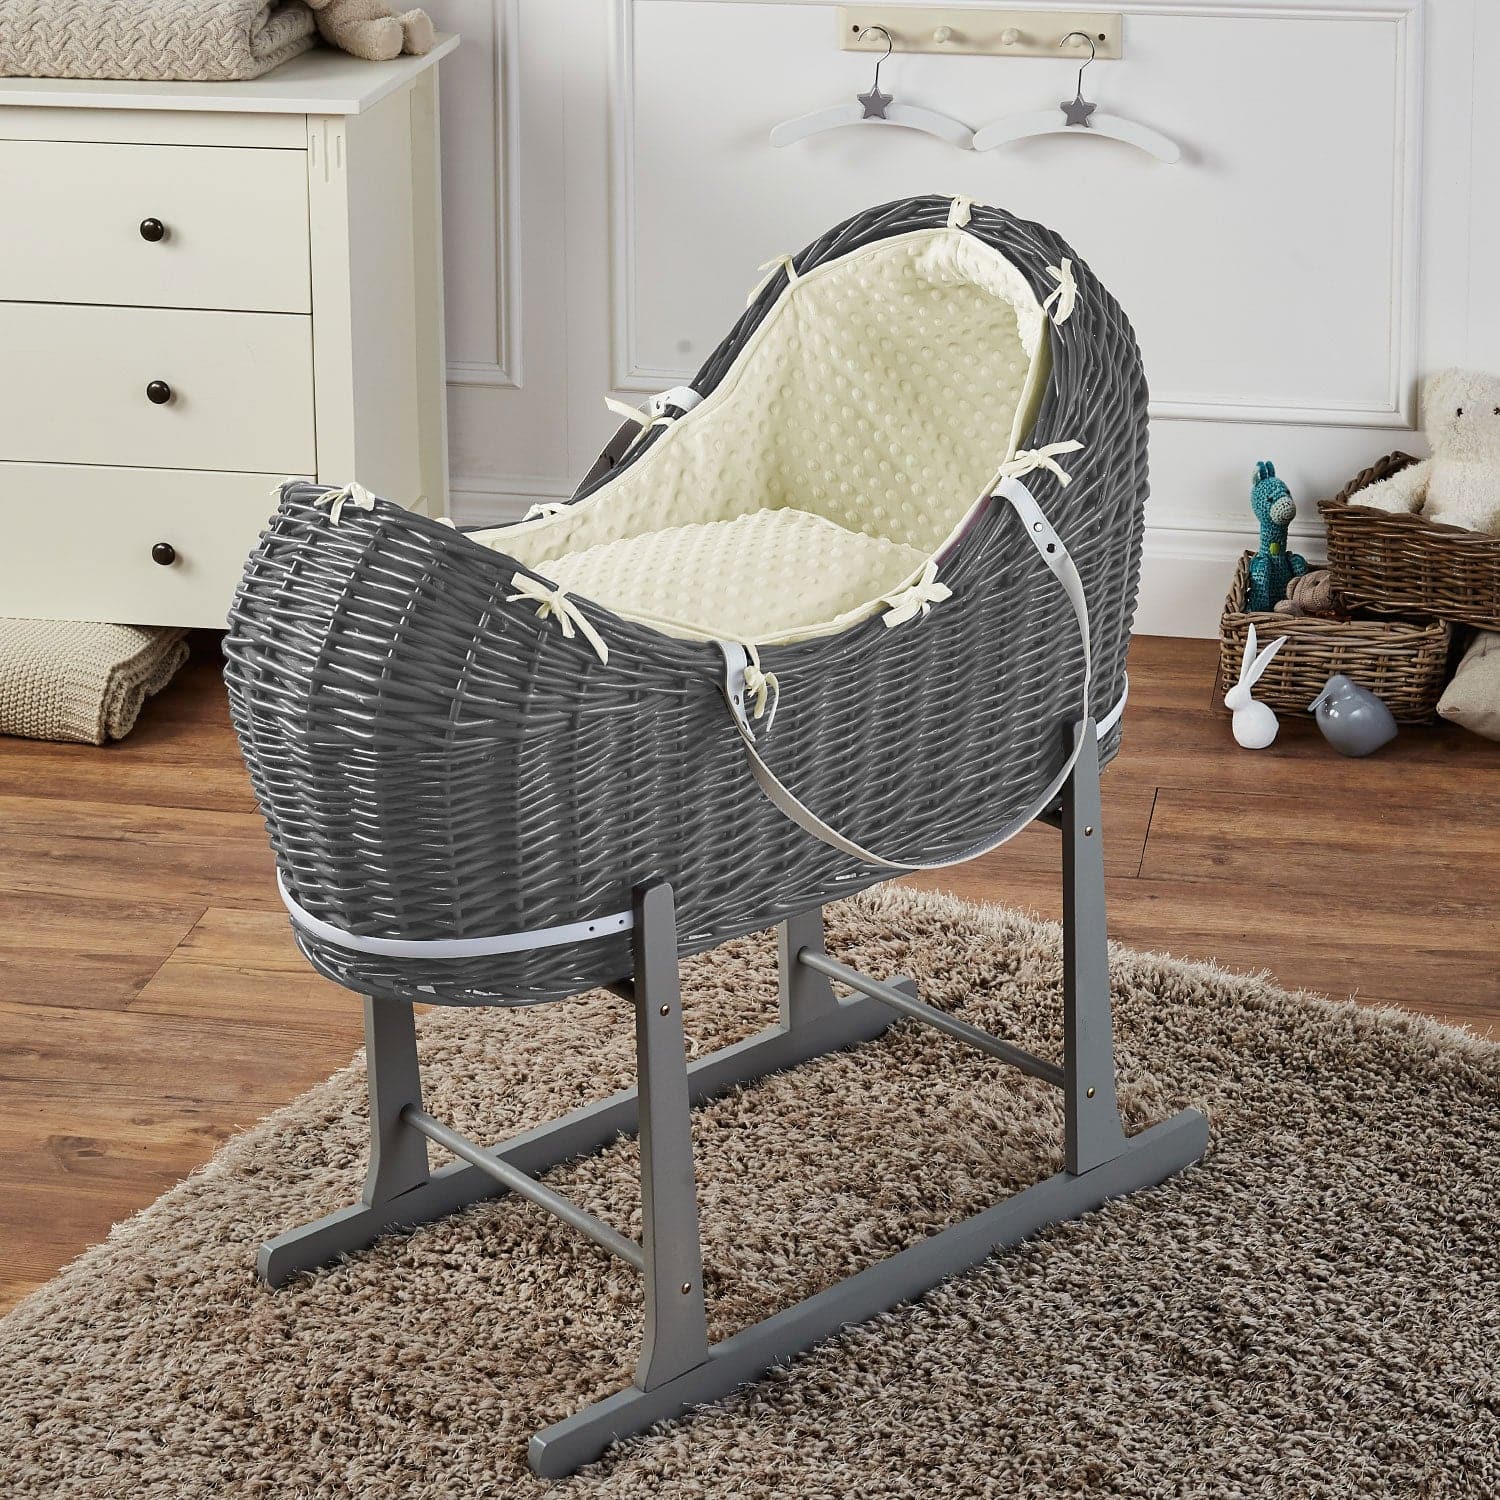 Wicker Deluxe Pod Baby Moses Basket With Stand - Grey / Dimple / Cream | For Your Little One